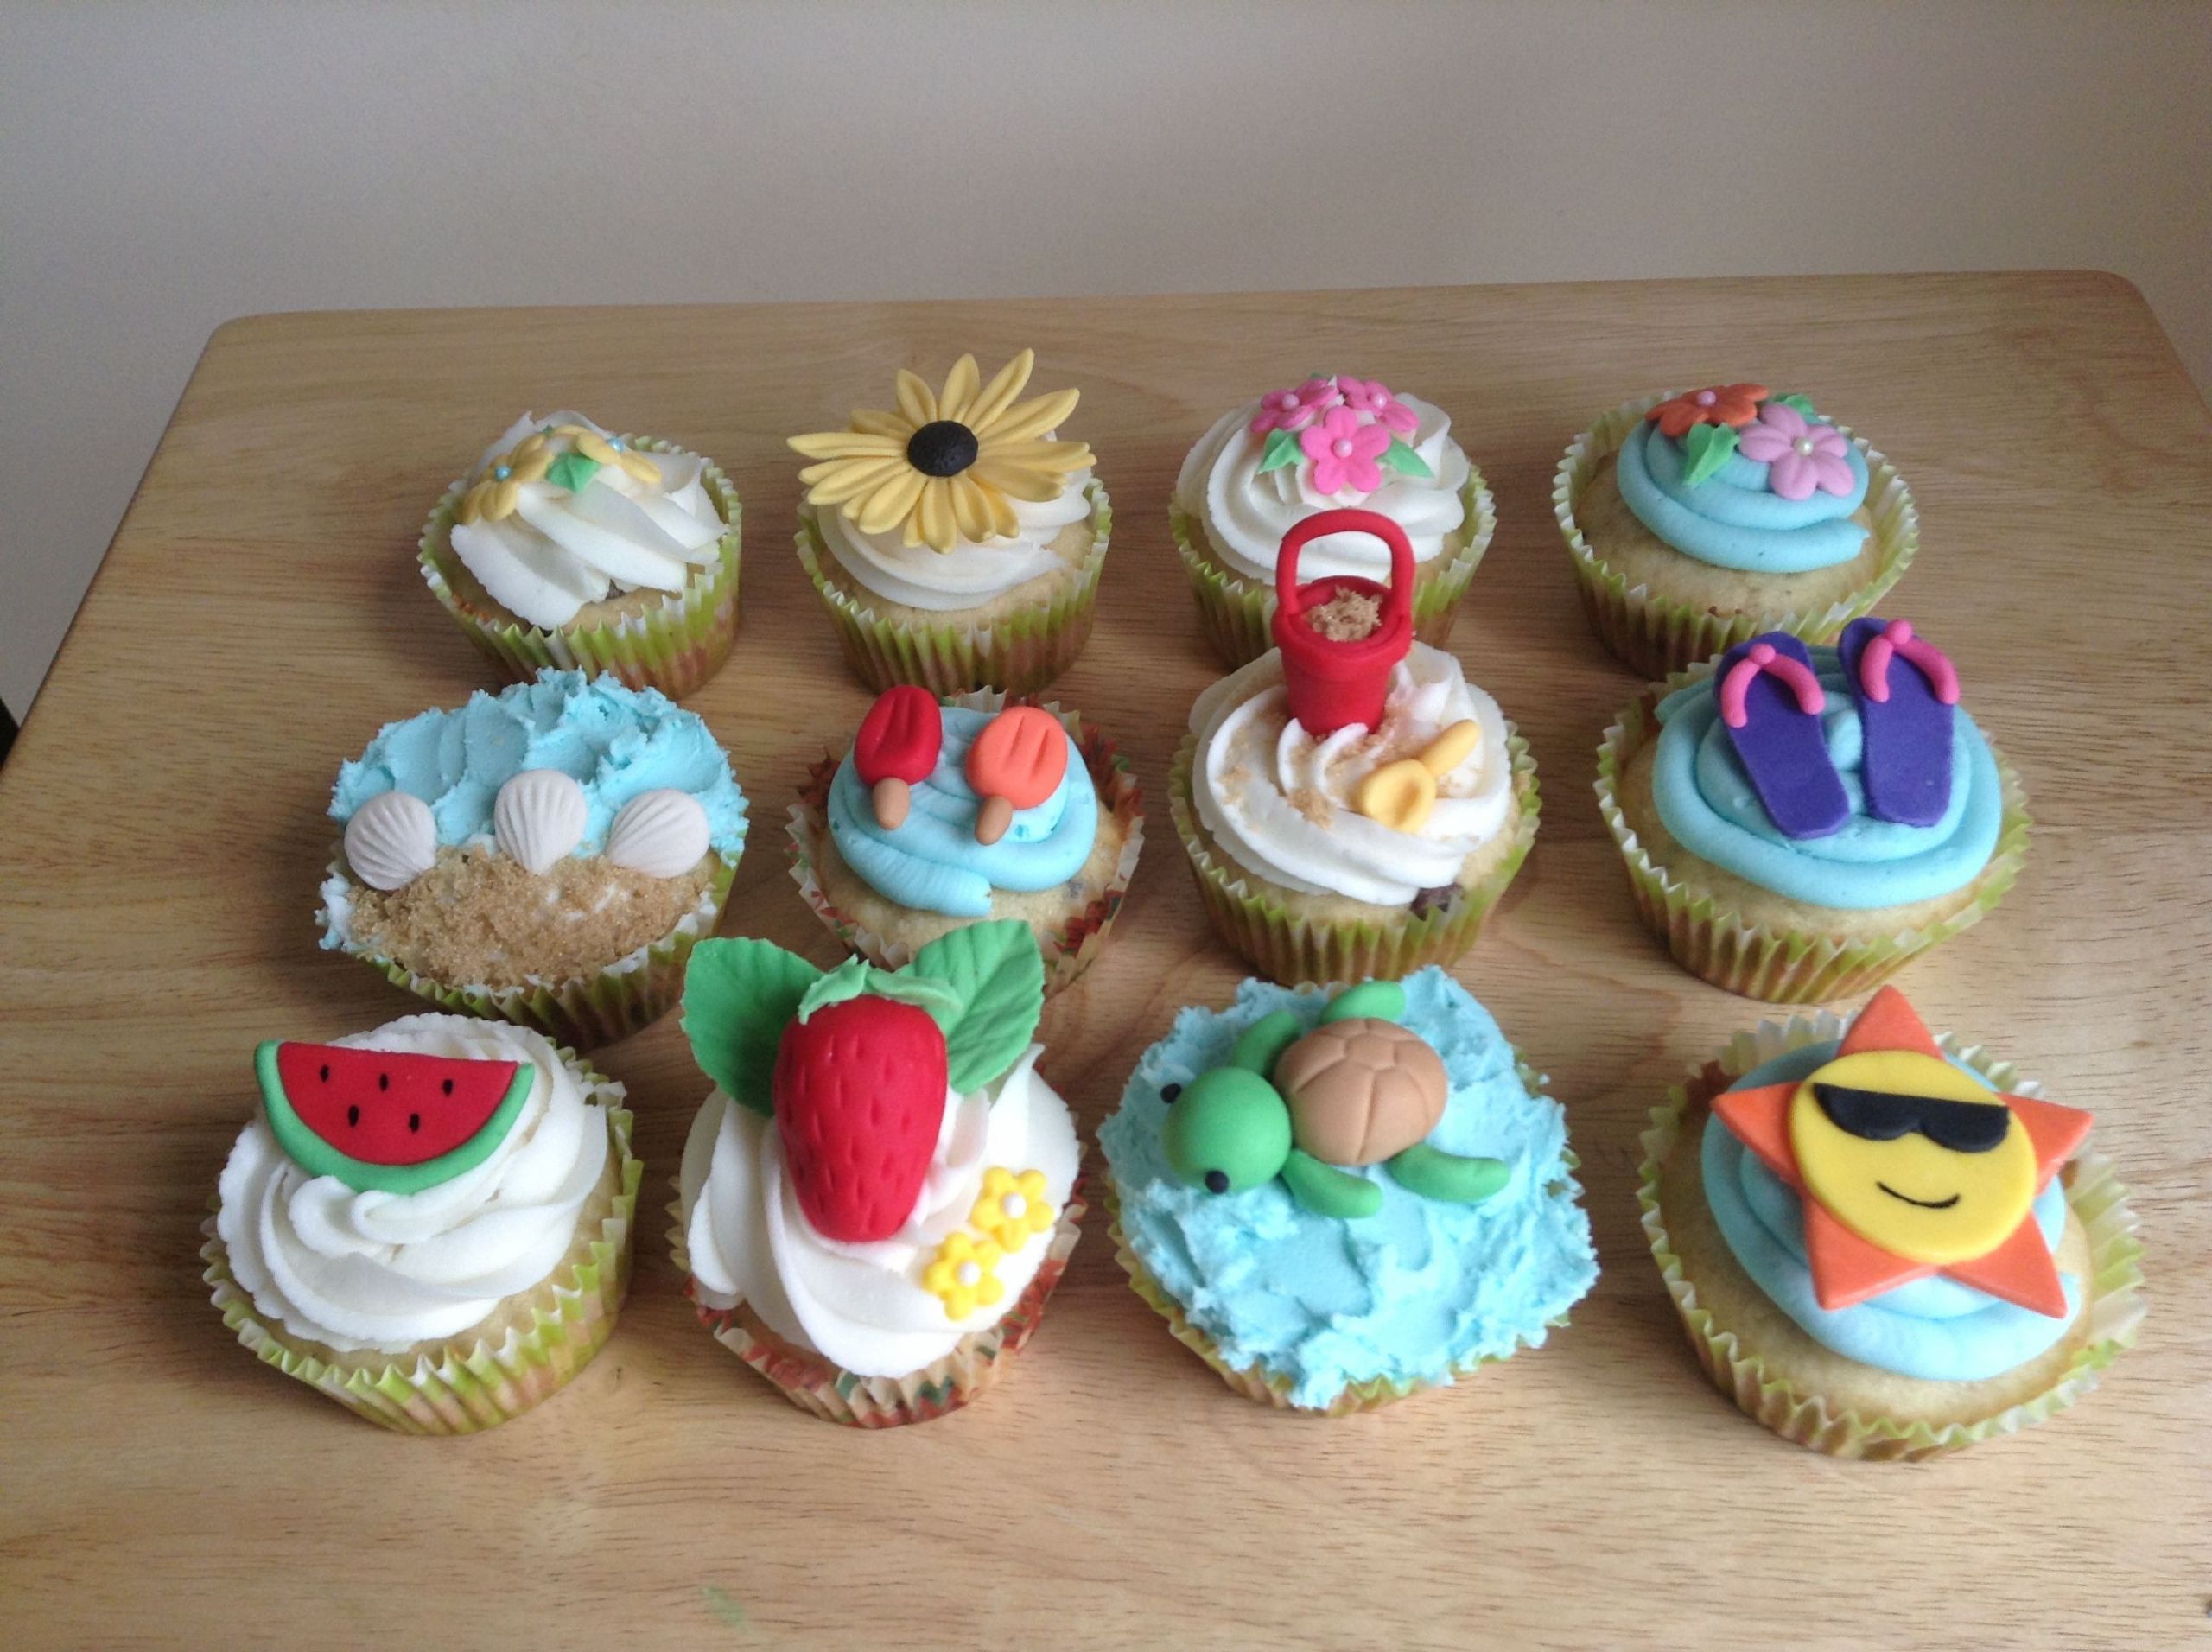 Summer Themed Cupcakes
 Summer themed cupcakes made by me